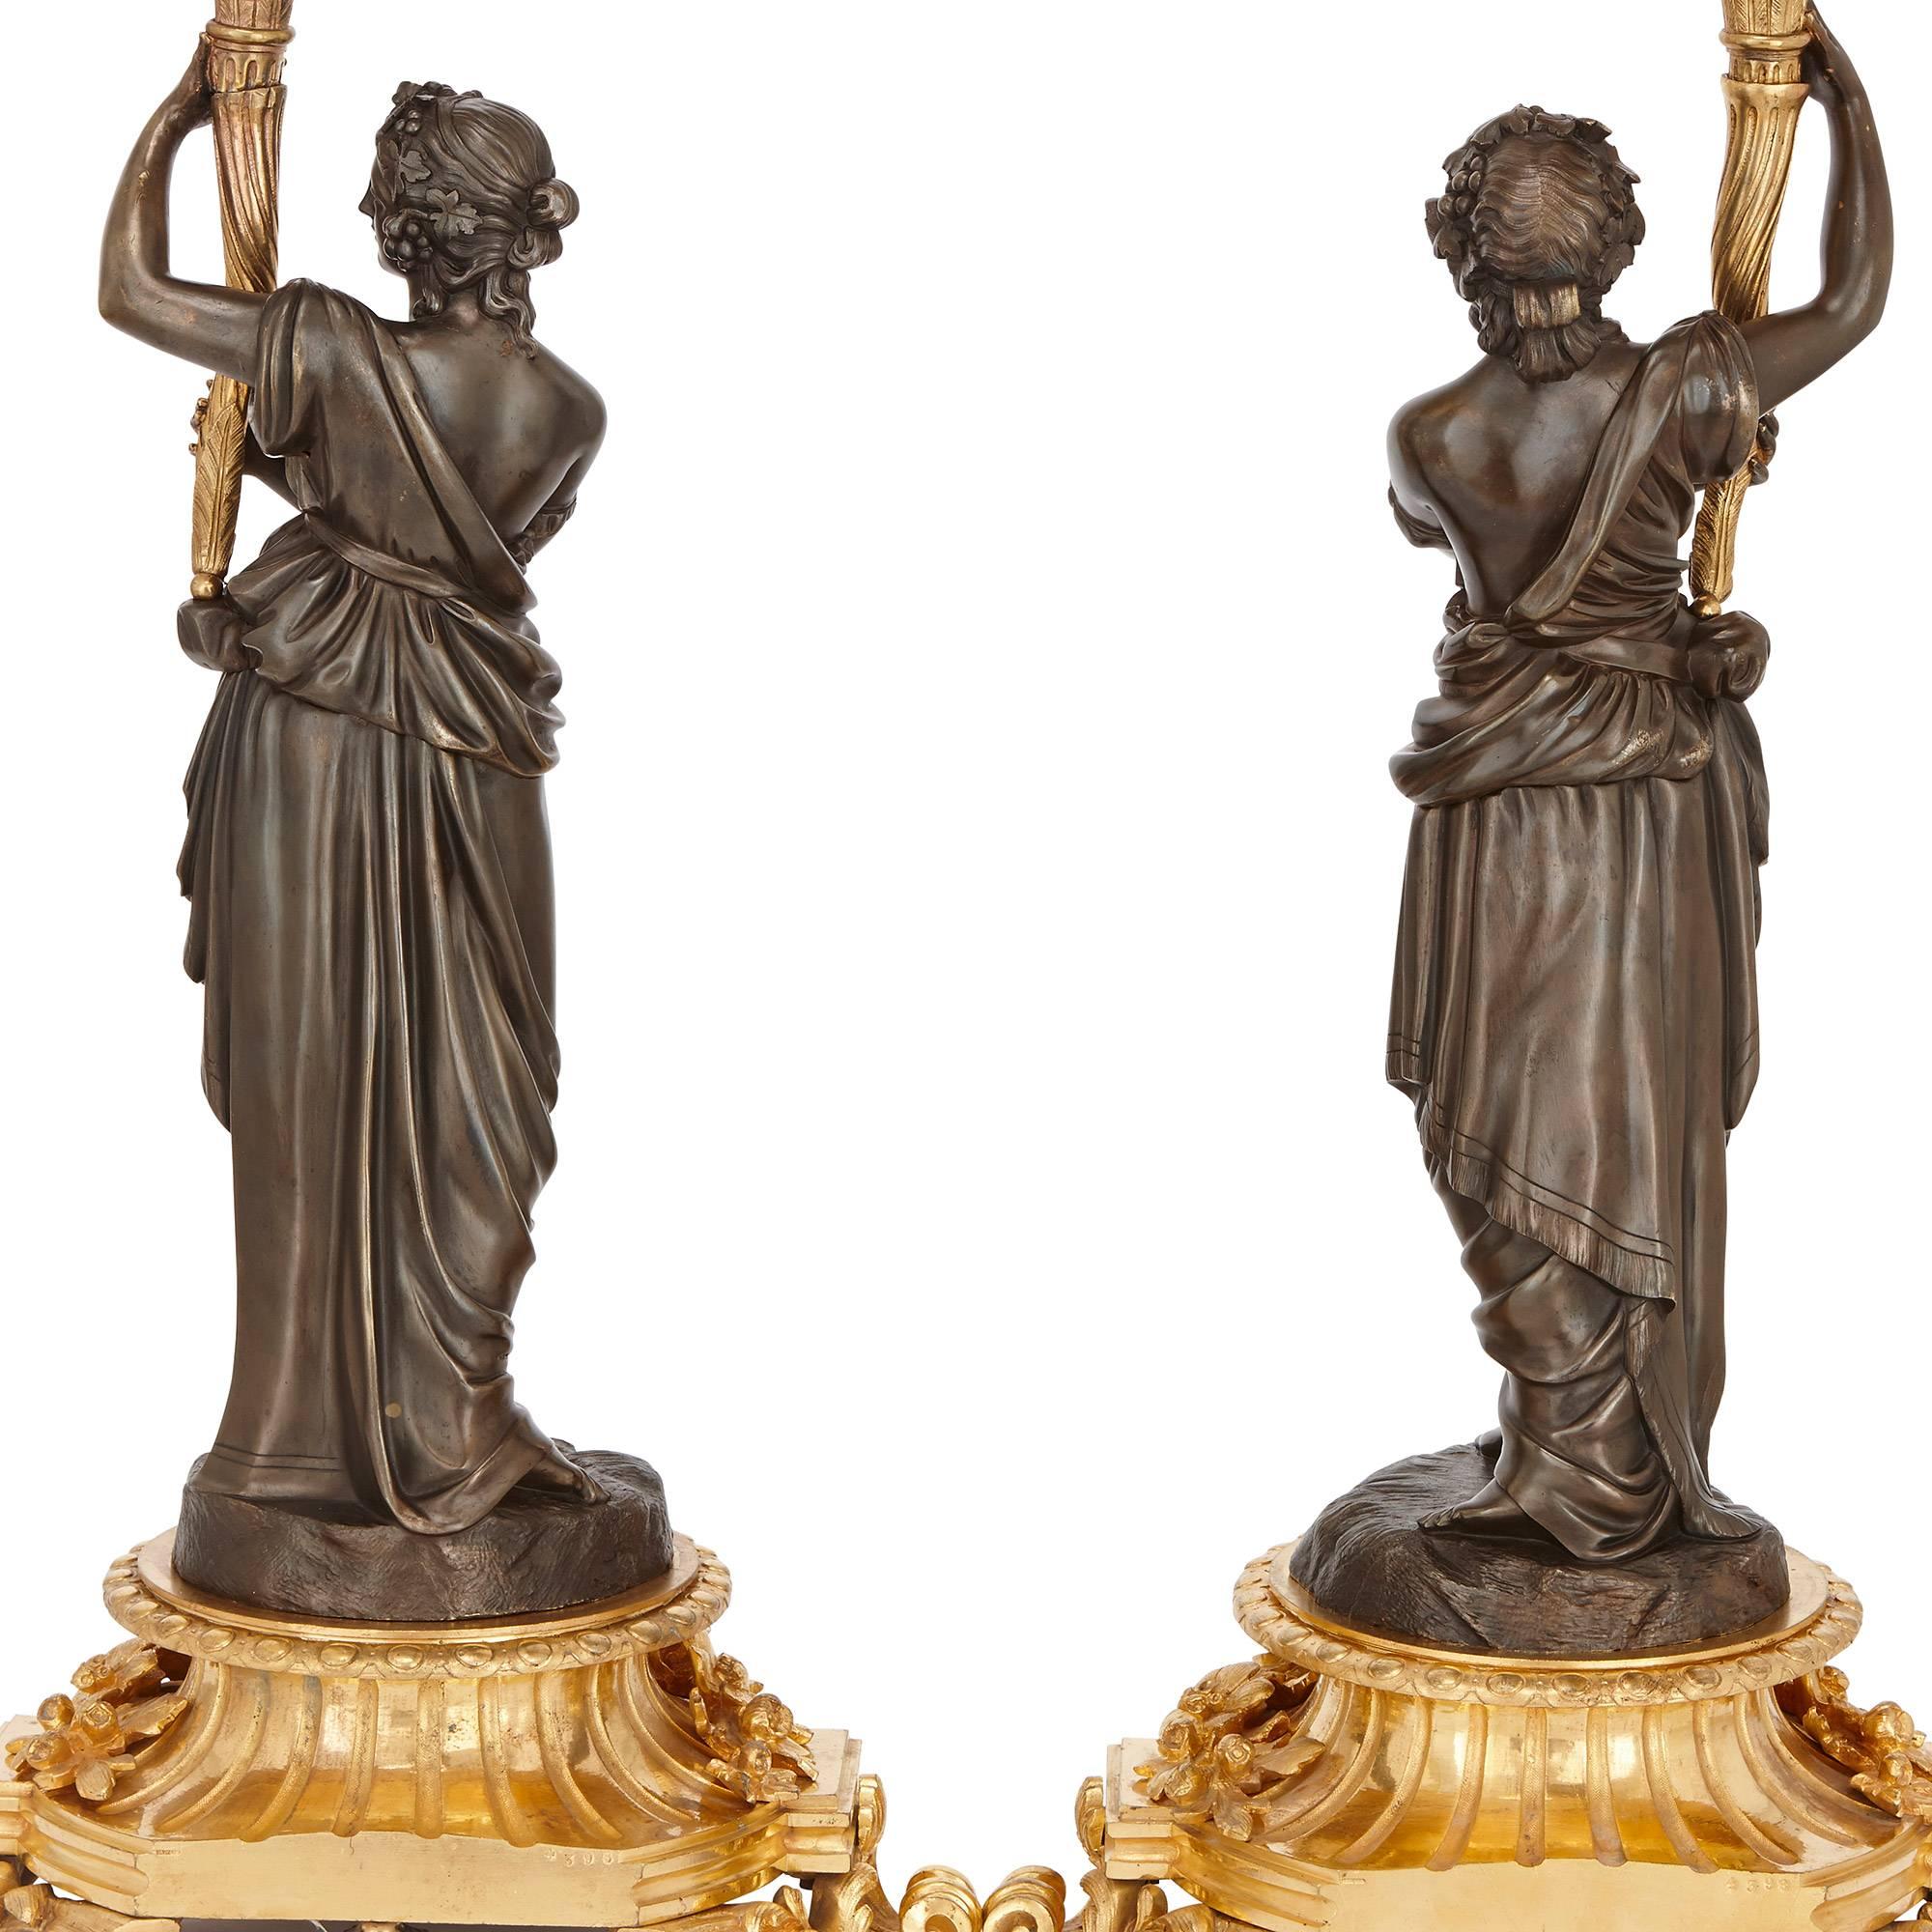 These exceptional antique French candelabra were made by prestigious French maker Henri Picard, who famously supplied works to Emperor Napoleon III of France. Each of the candelabra are modelled as a Classical female figure in patinated bronze,